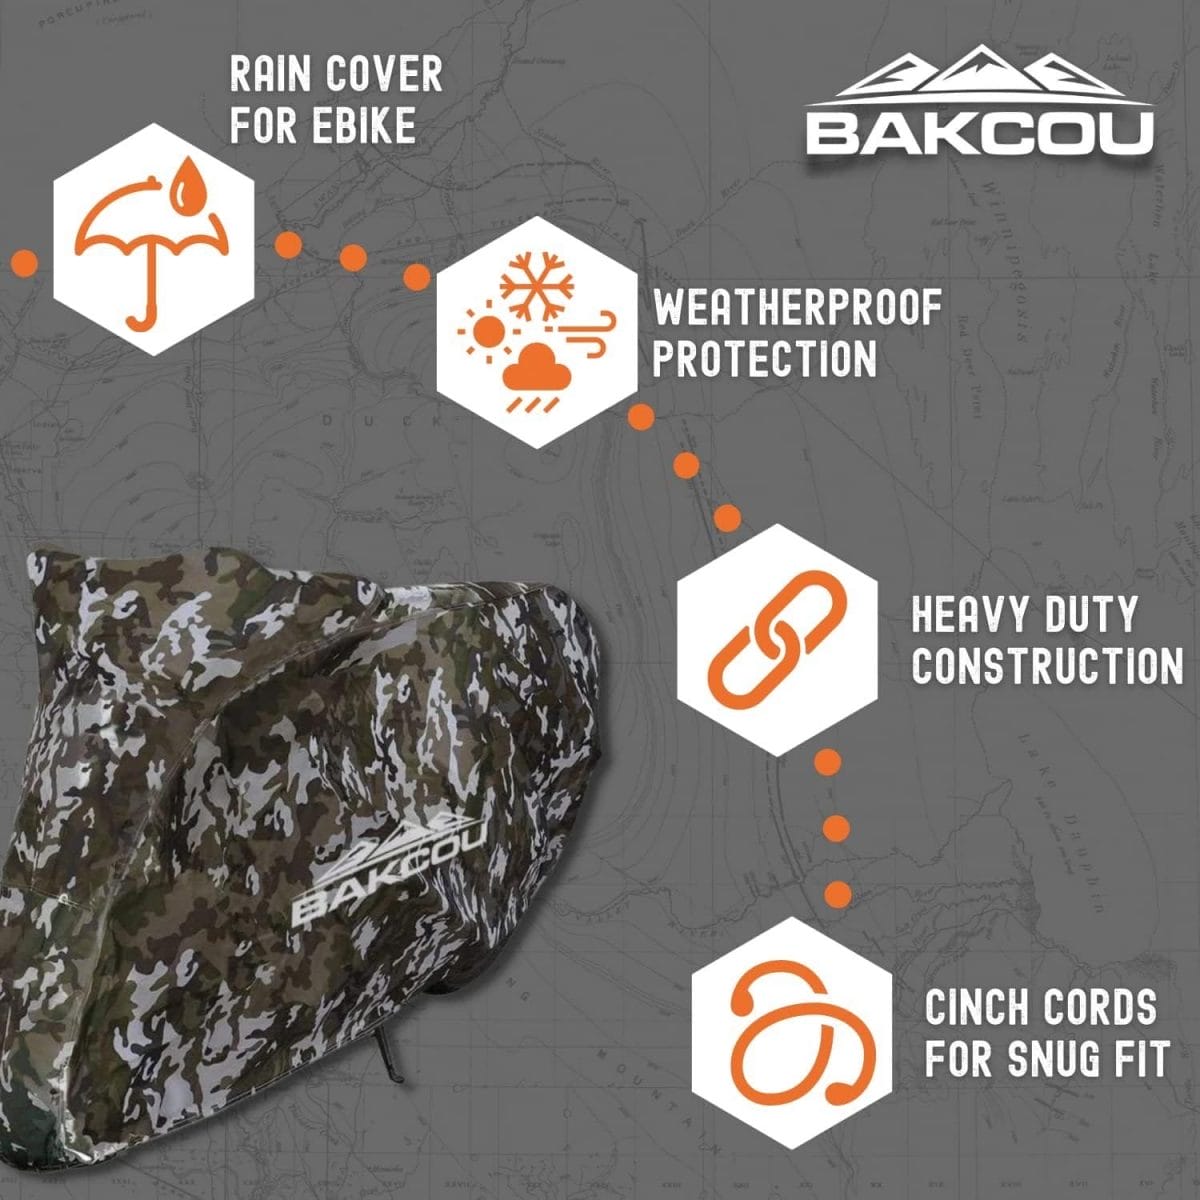 Bakcou Outdoor Bike Cover - Travel Ready Covers for eBikes and Bicycles - Waterproof Cover for Snow, Rain, Sun, UV, and Dust Protection - Heavy-Duty Nylon Camouflage Cover